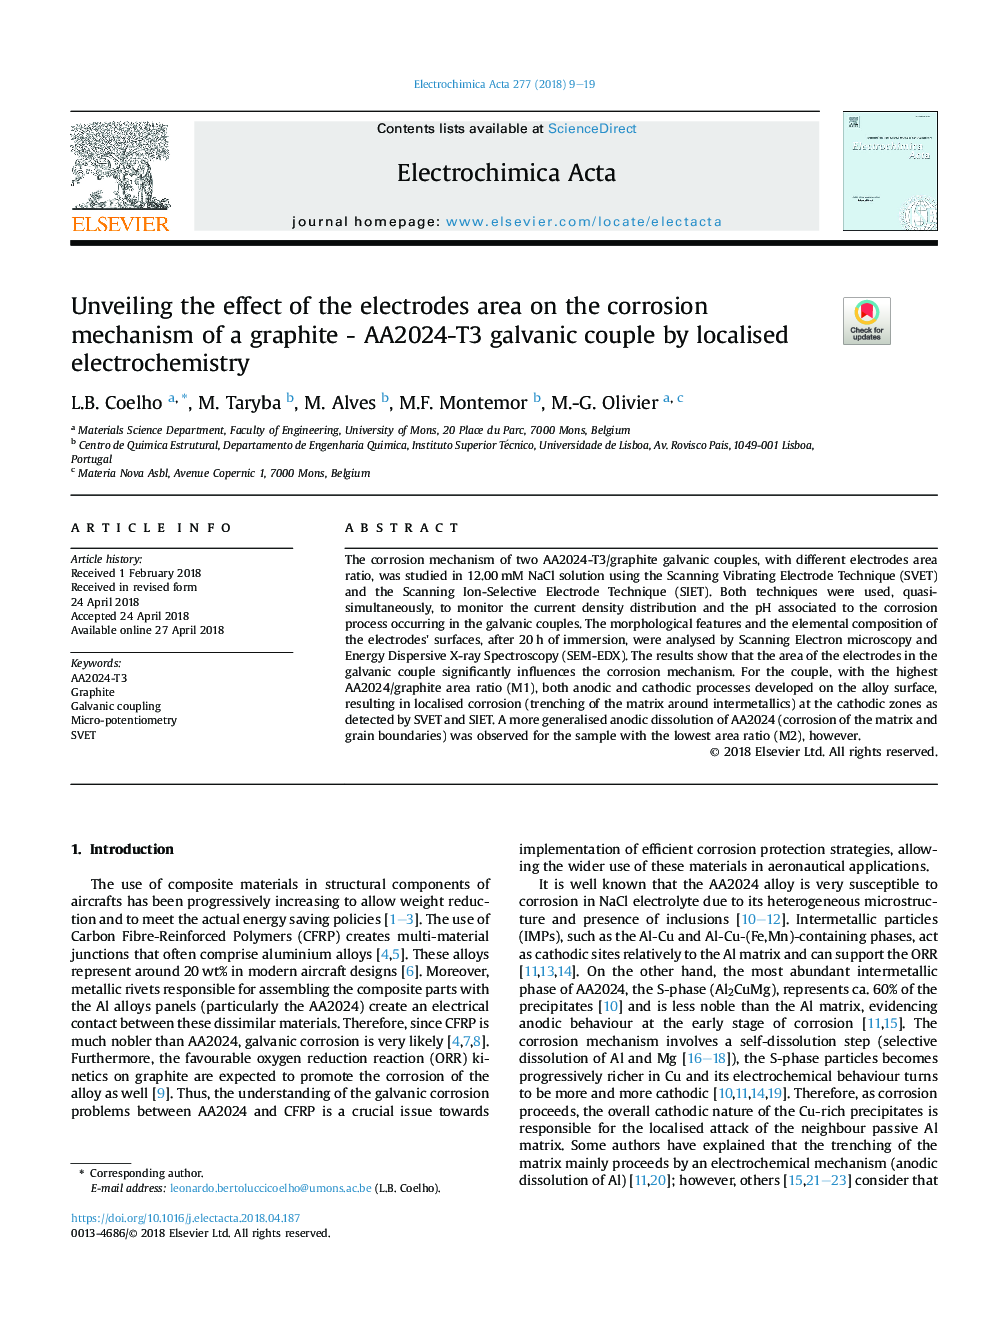 Unveiling the effect of the electrodes area on the corrosion mechanism of a graphite - AA2024-T3 galvanic couple by localised electrochemistry